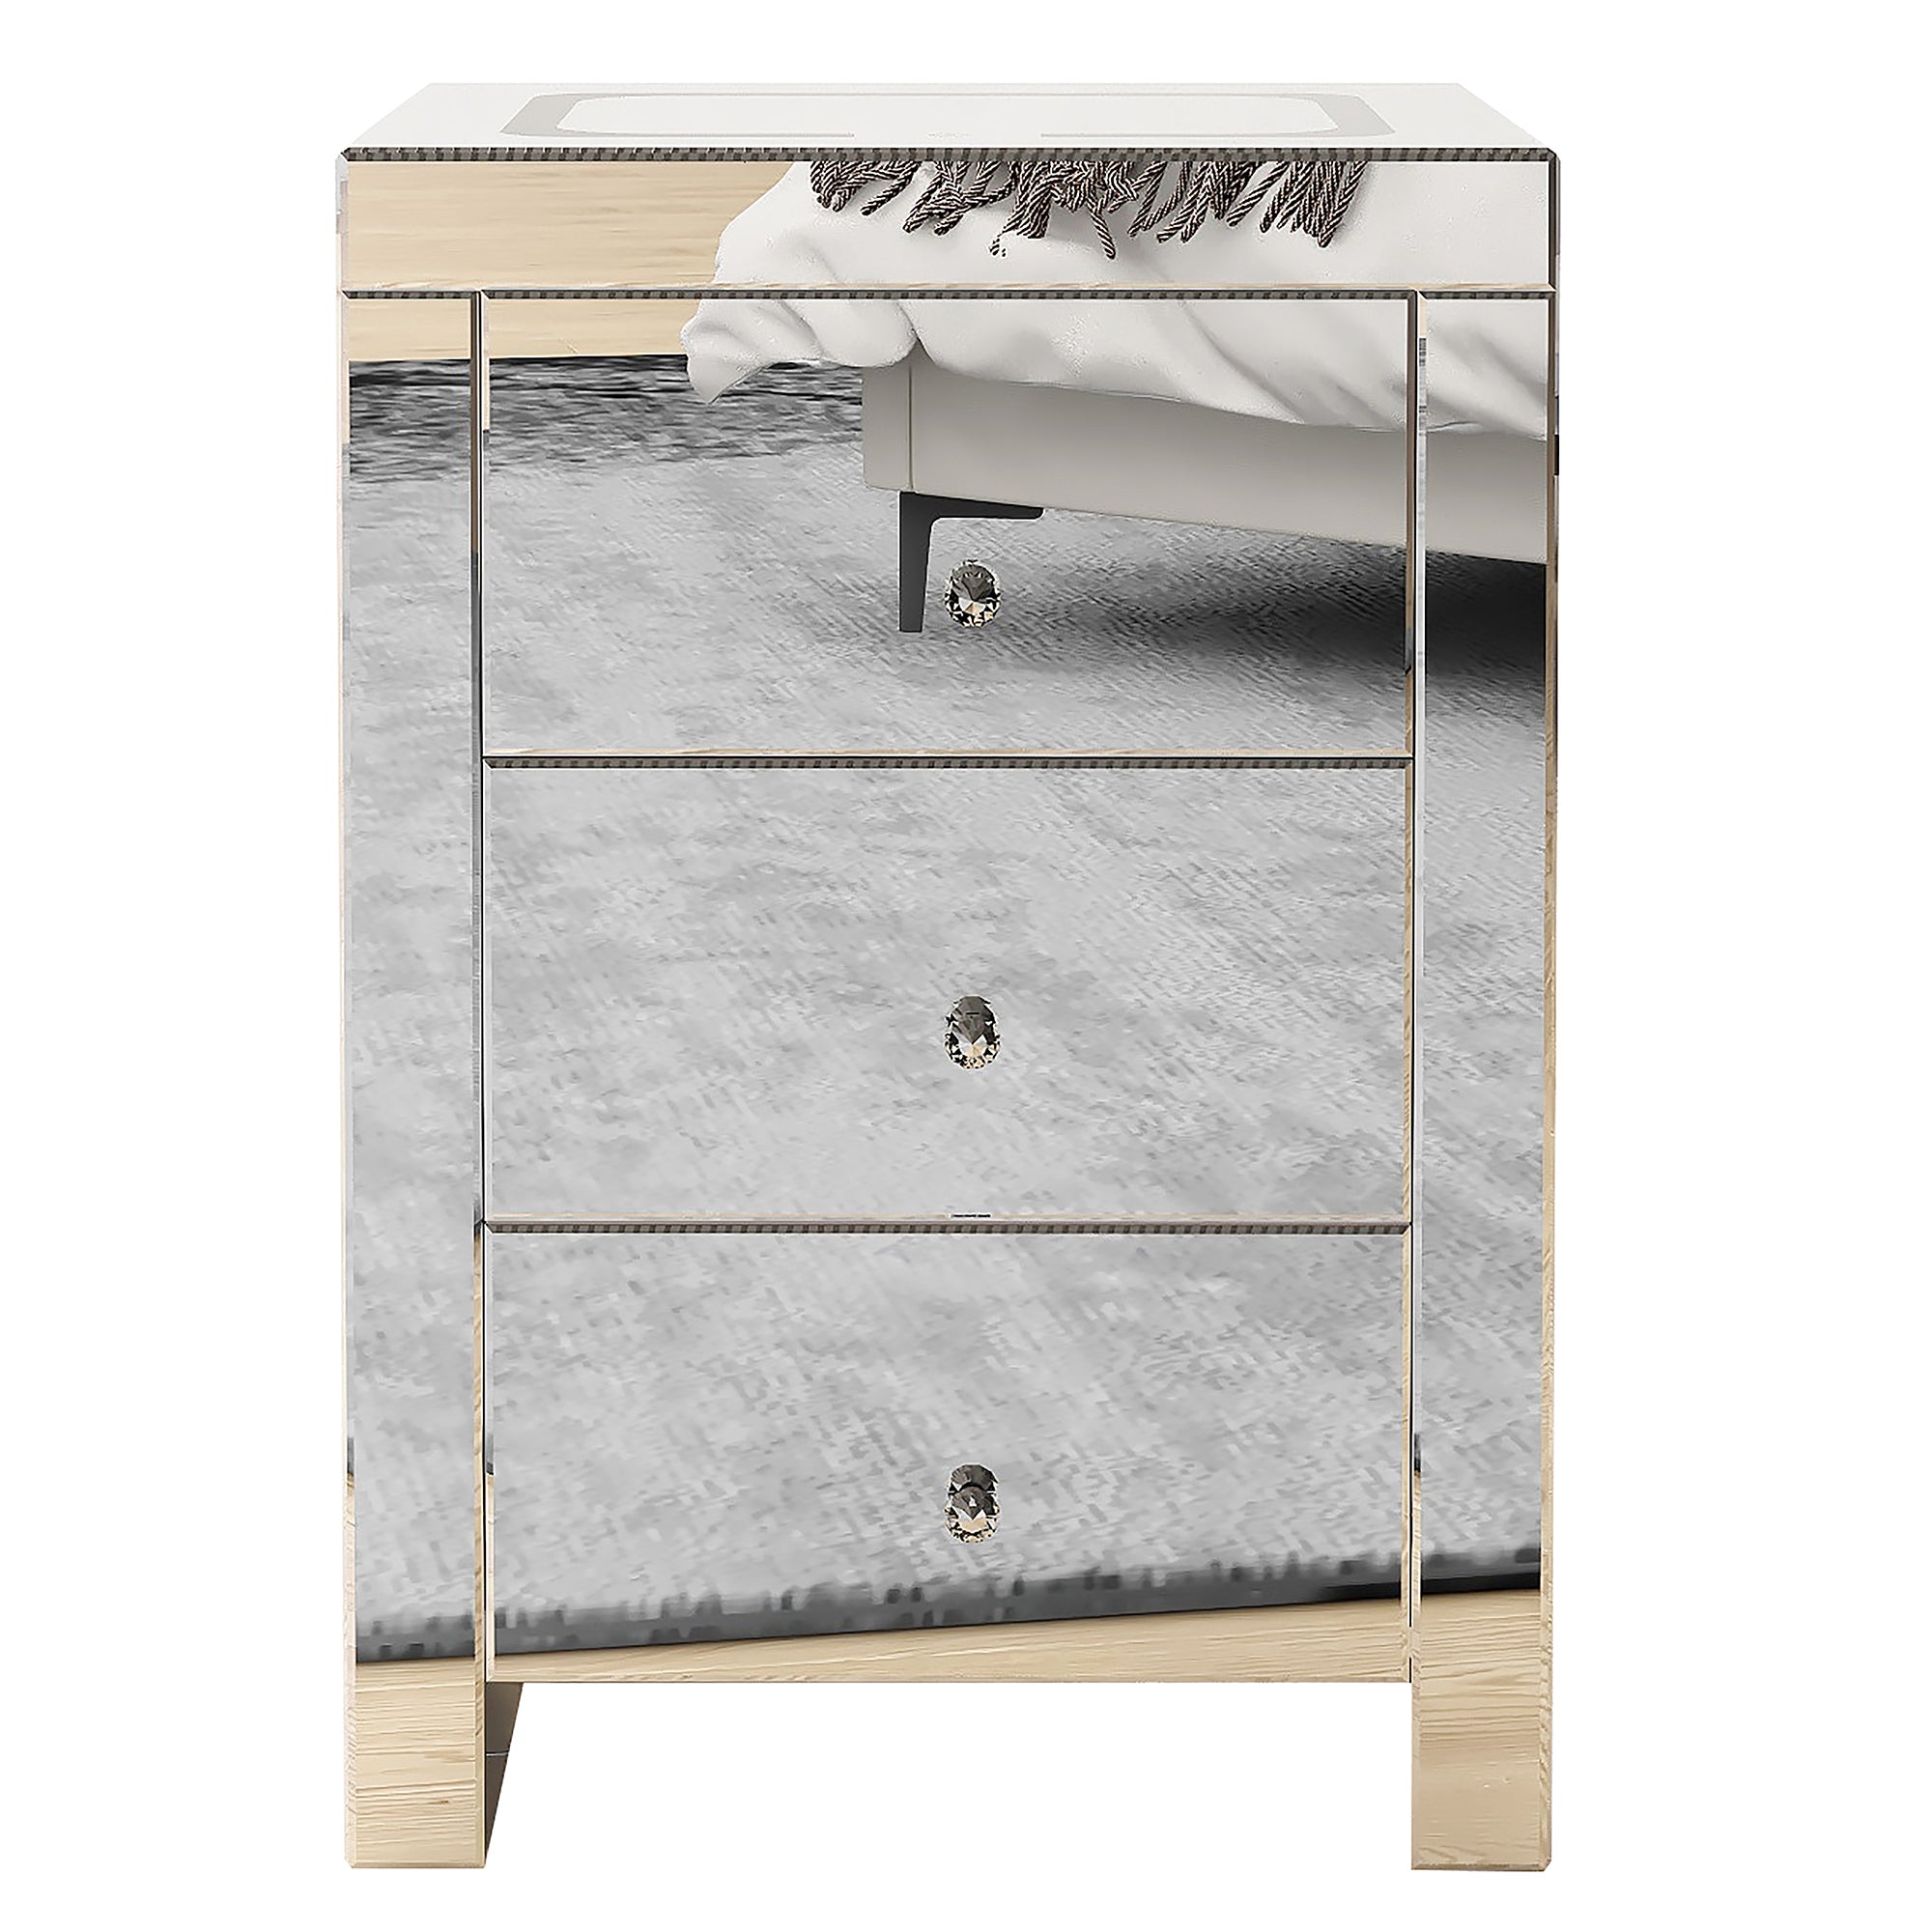 Silver glass nightstand for living room, bedside table silver-3 drawers-mdf+glass